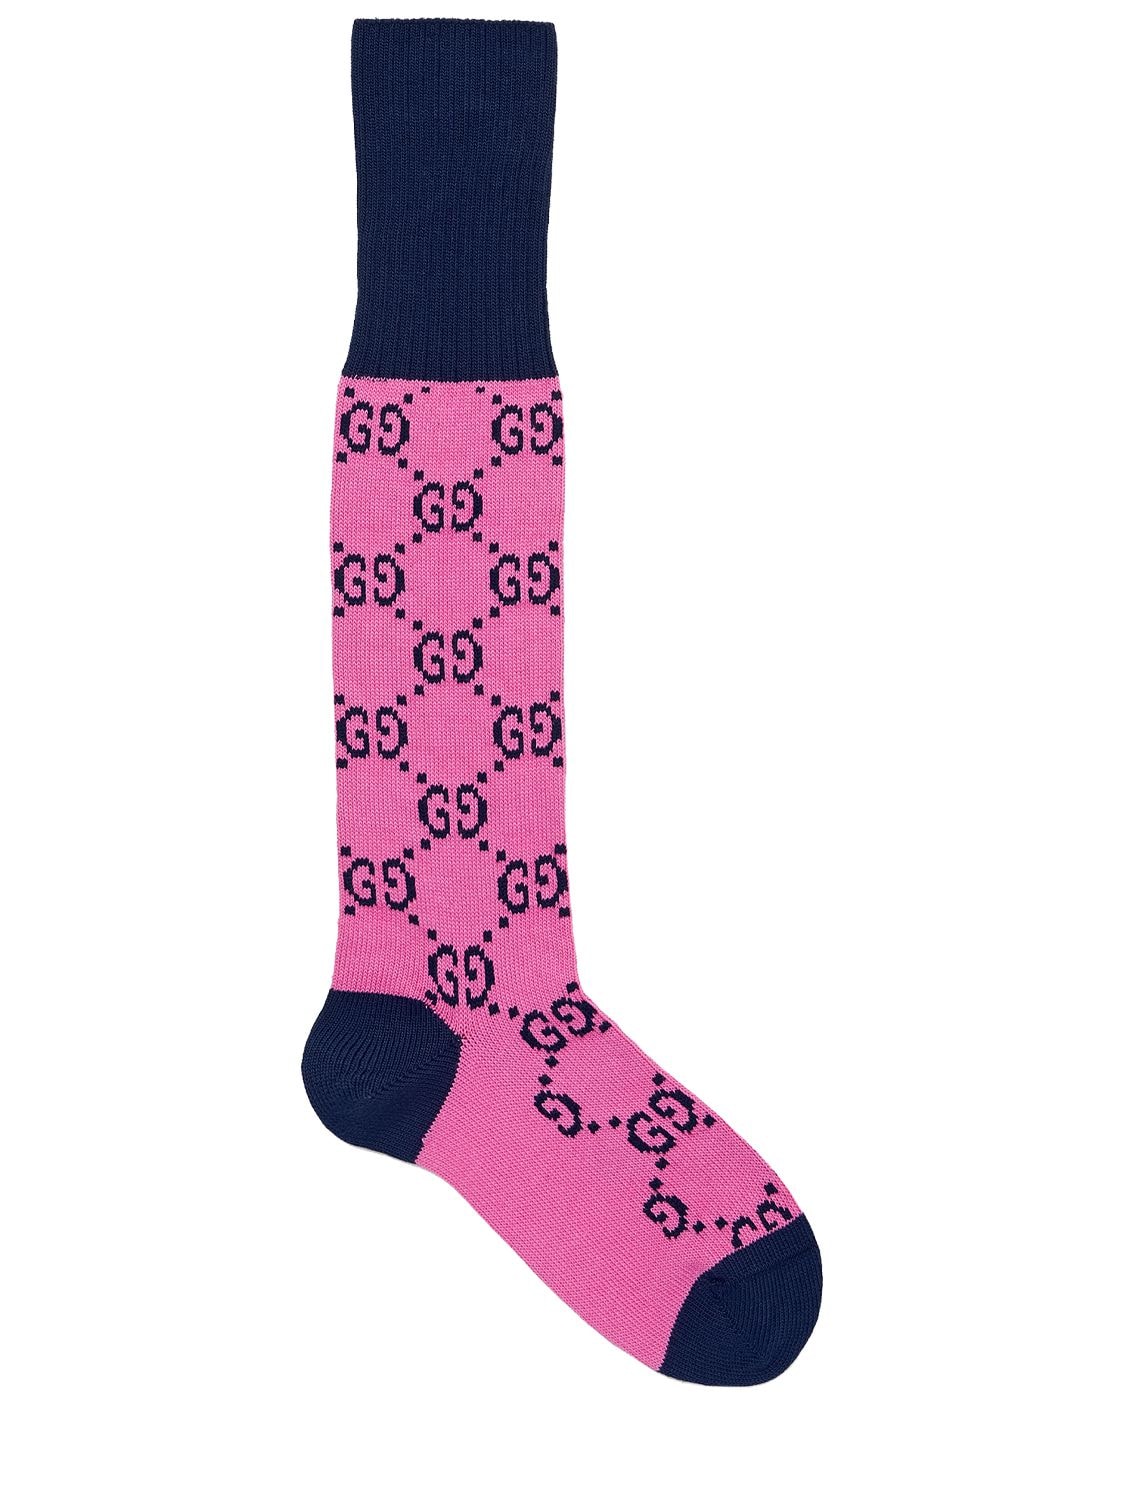 Gucci Gg Multicolor Logo Cotton Blend Socks In Pink And Blue